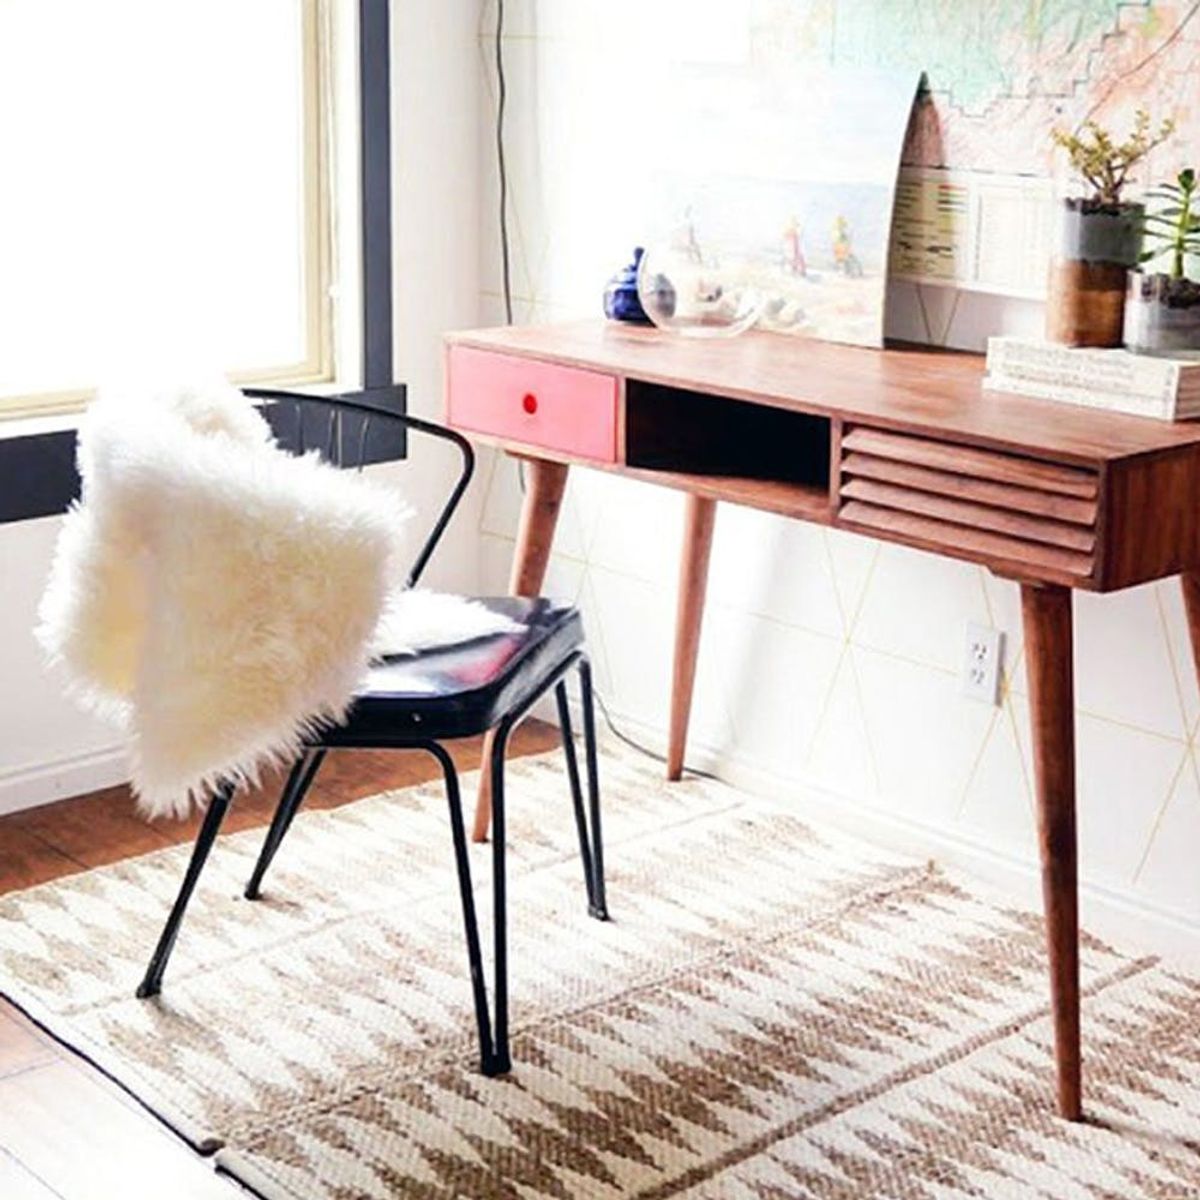 14 Affordable Mid-Century Decor Ideas for Your Home